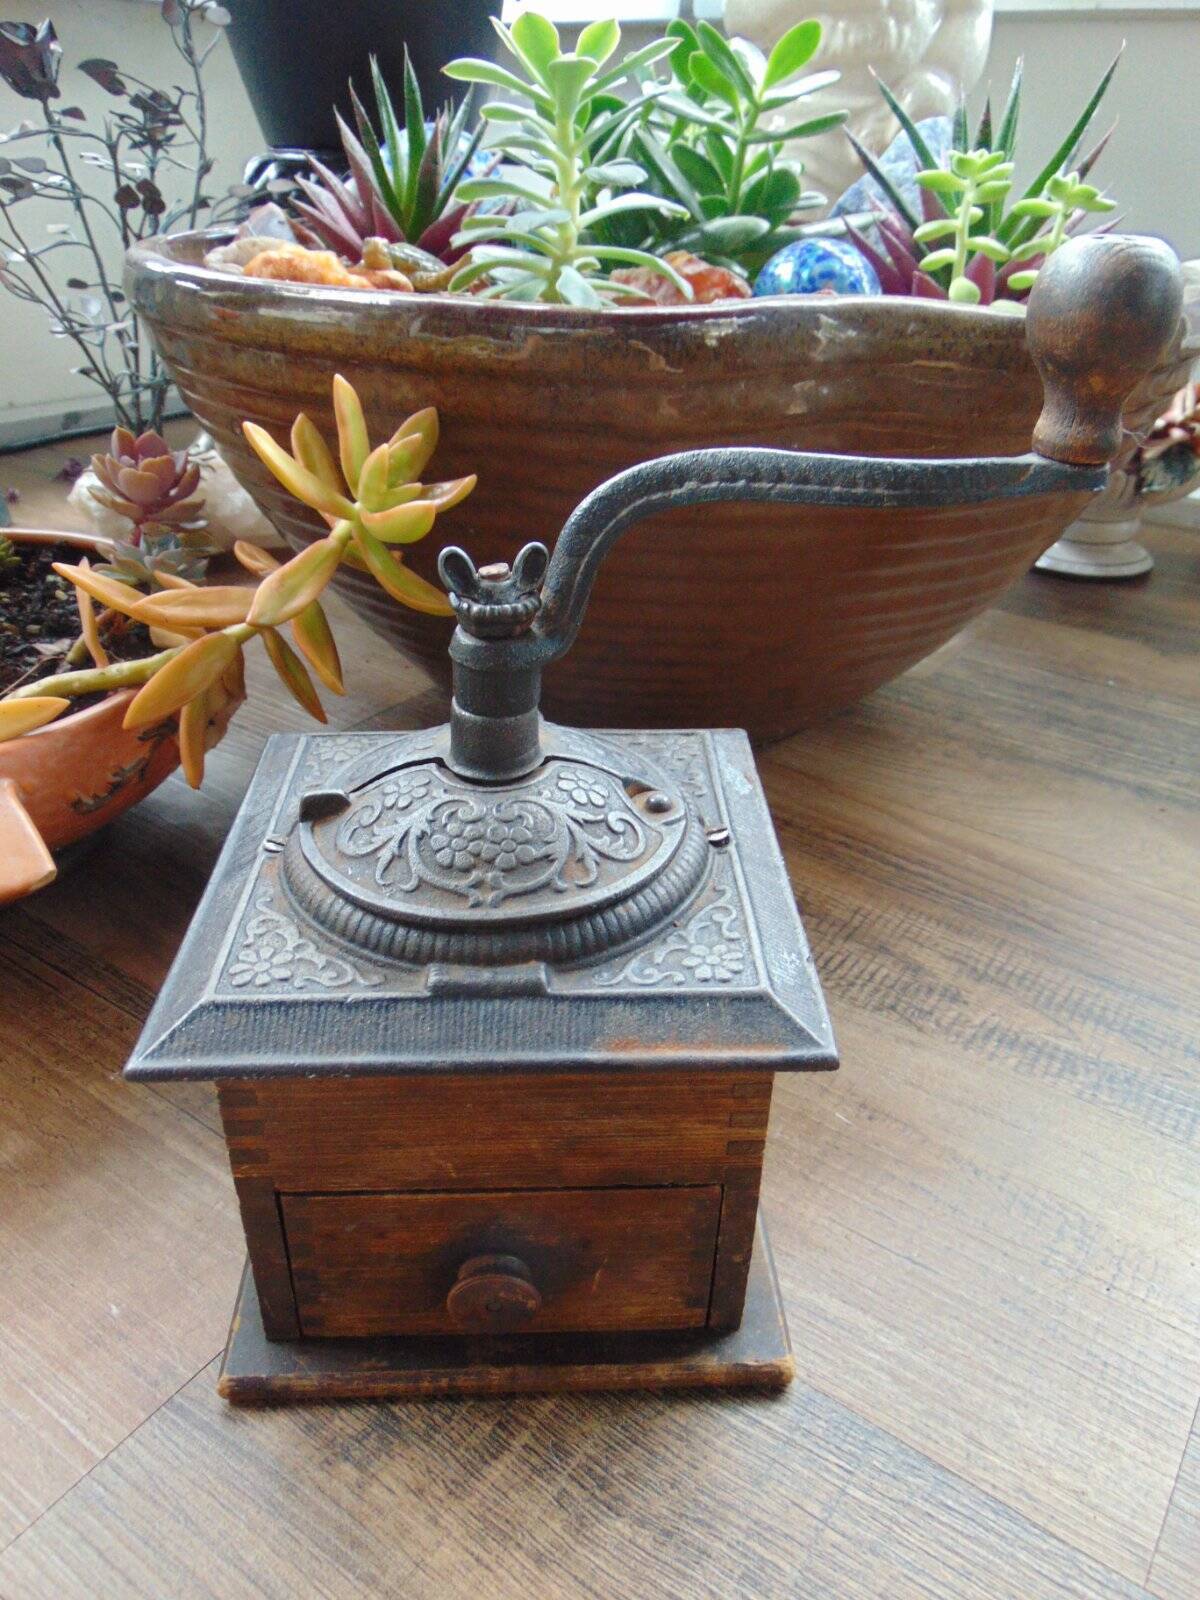 authentic antique old vintage COFFEE GRINDER MILL wood & cast metal